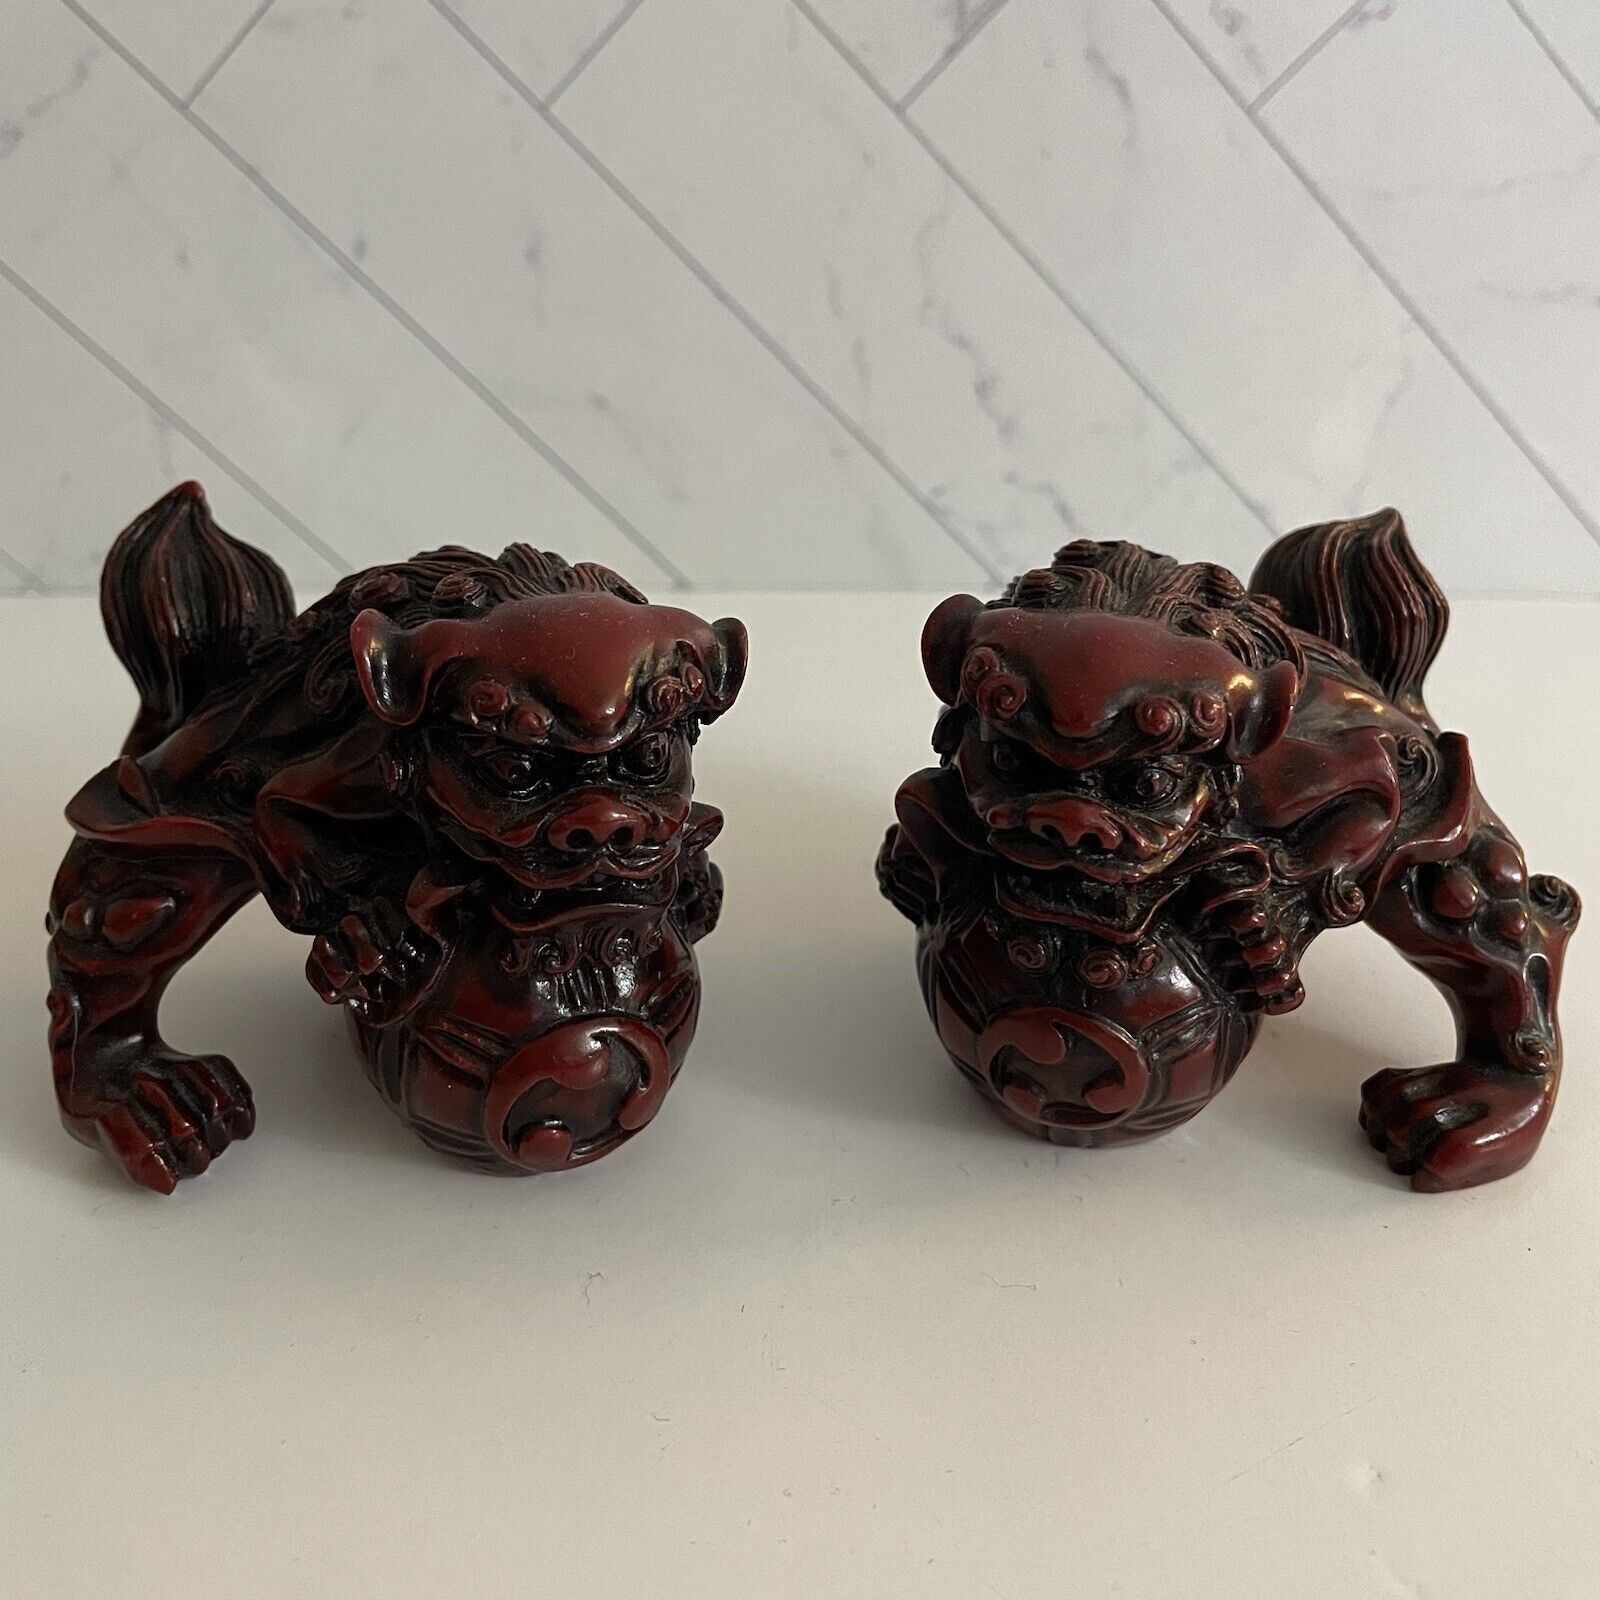 Pair of Traditional Chinese Foo Dogs Guardian Lion Figurines Cinnabar Resin 2.5”